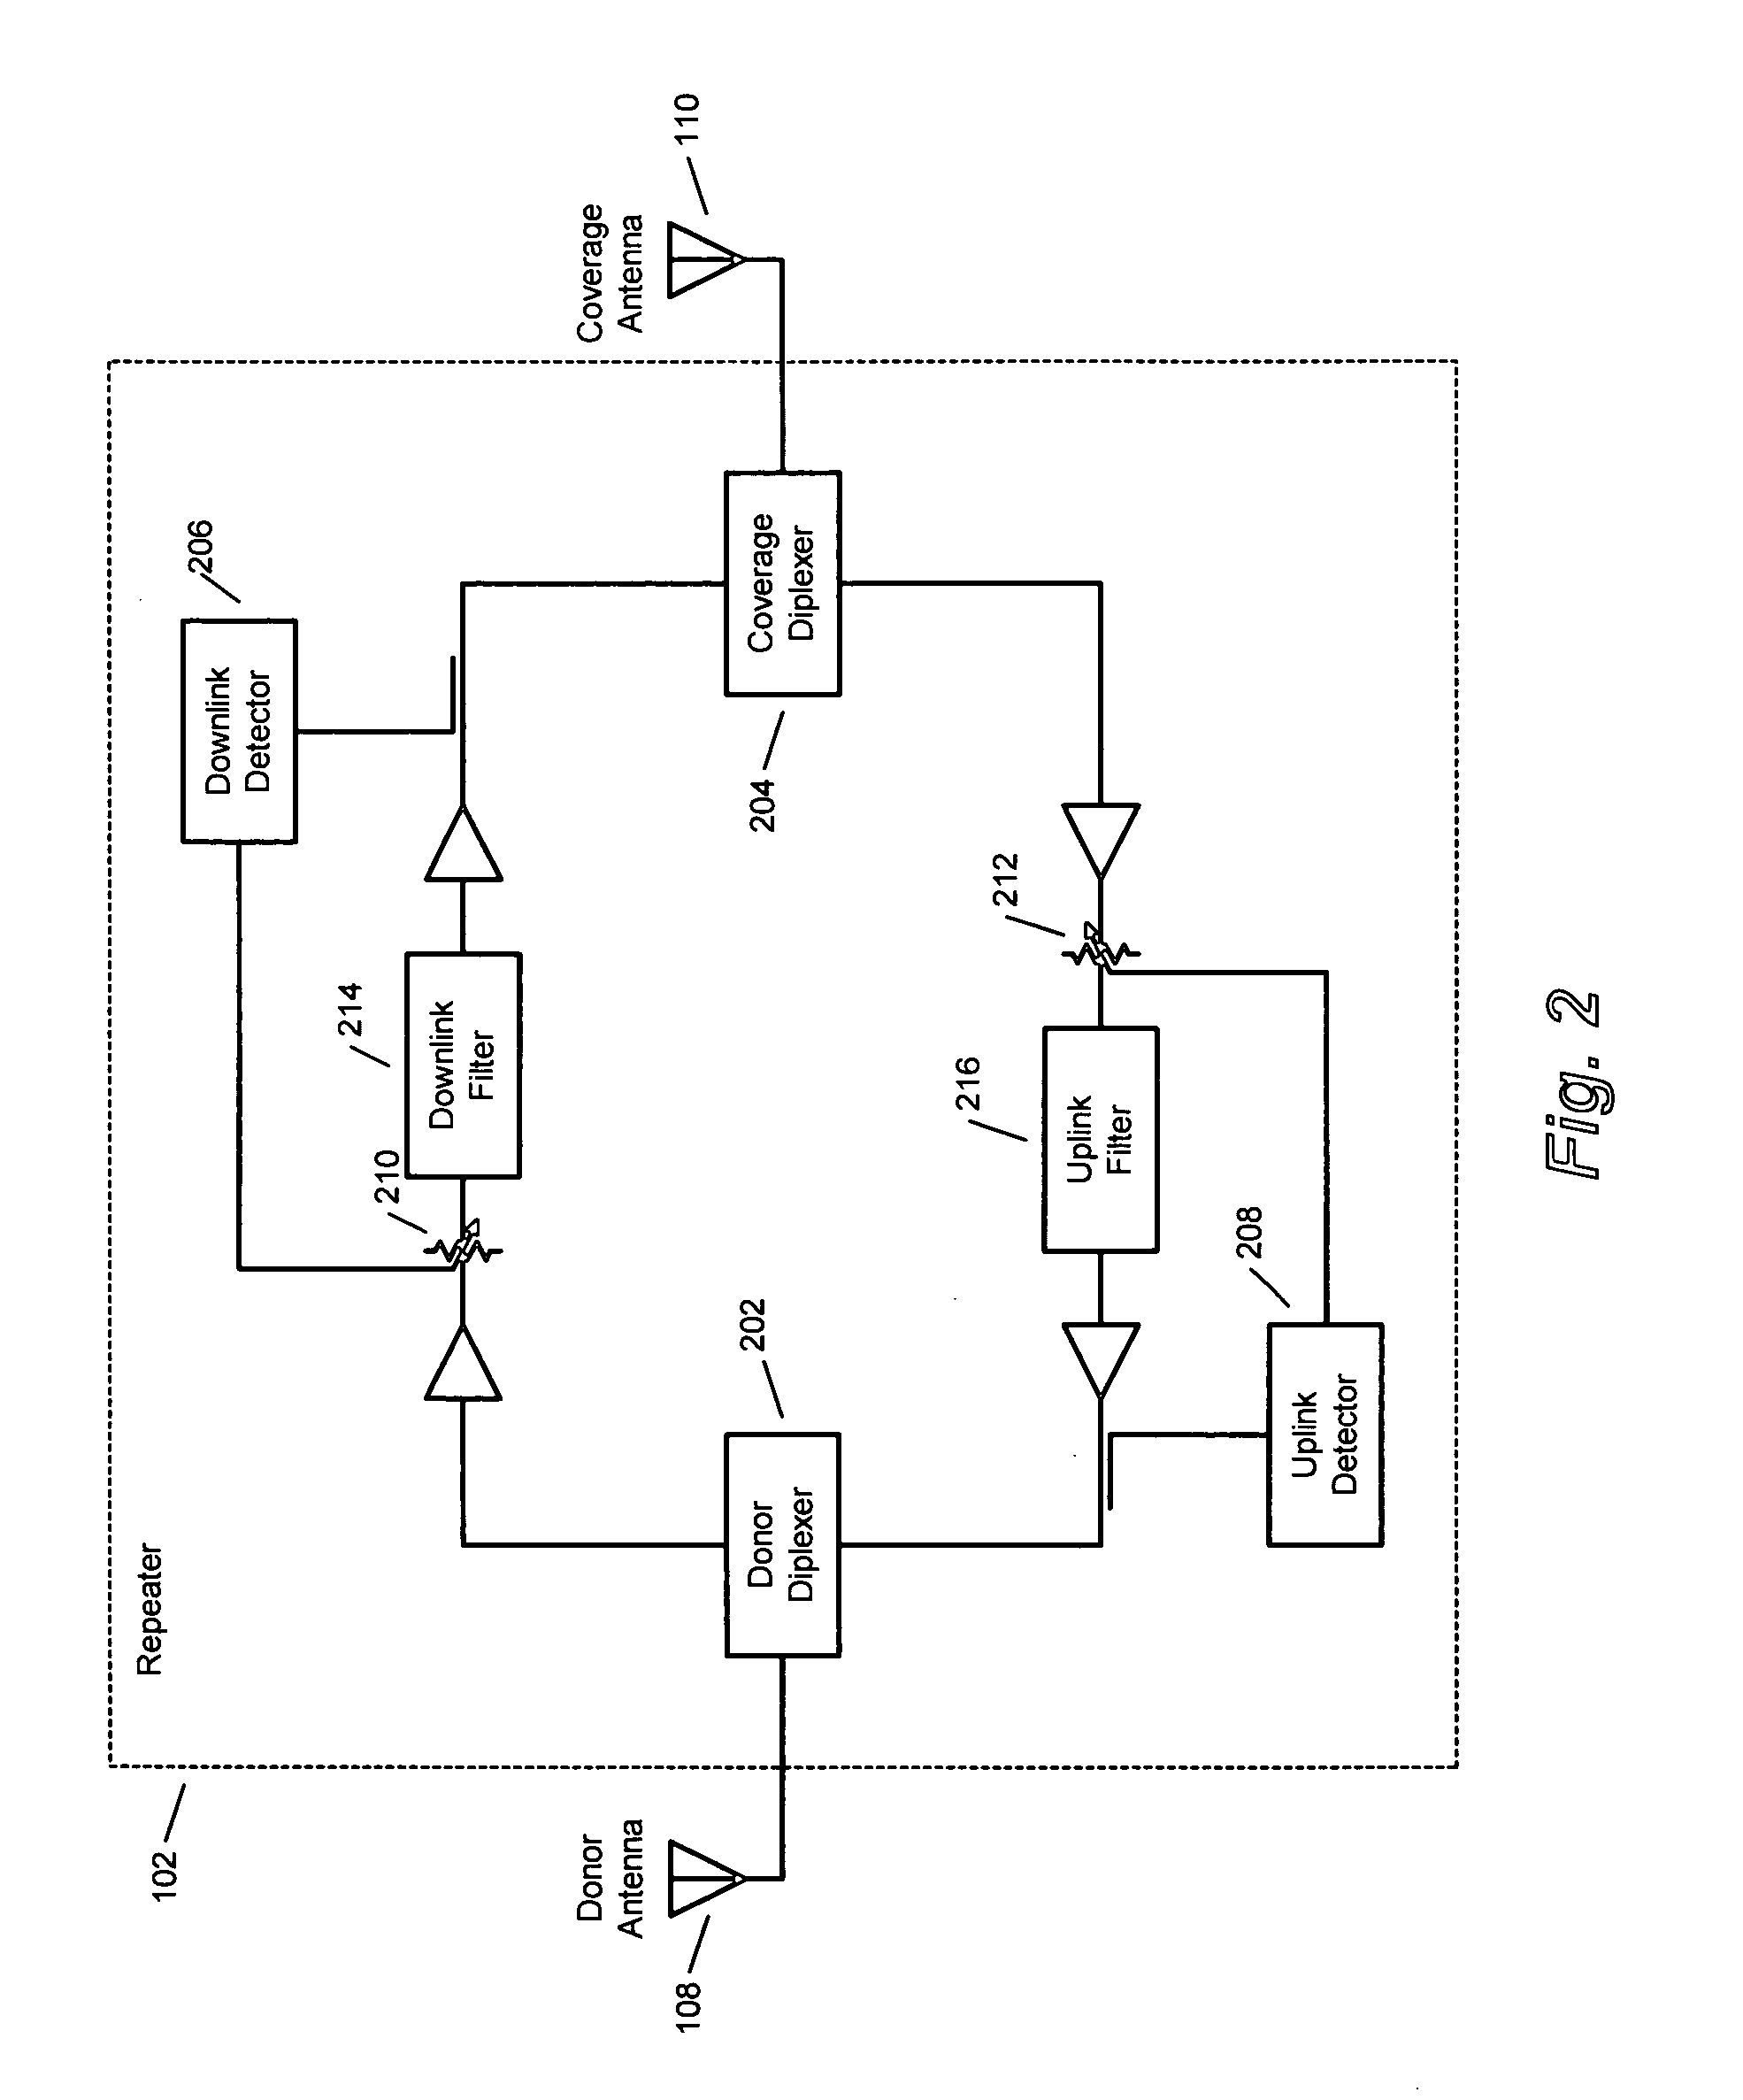 Wireless repeater with arbitrary programmable selectivity